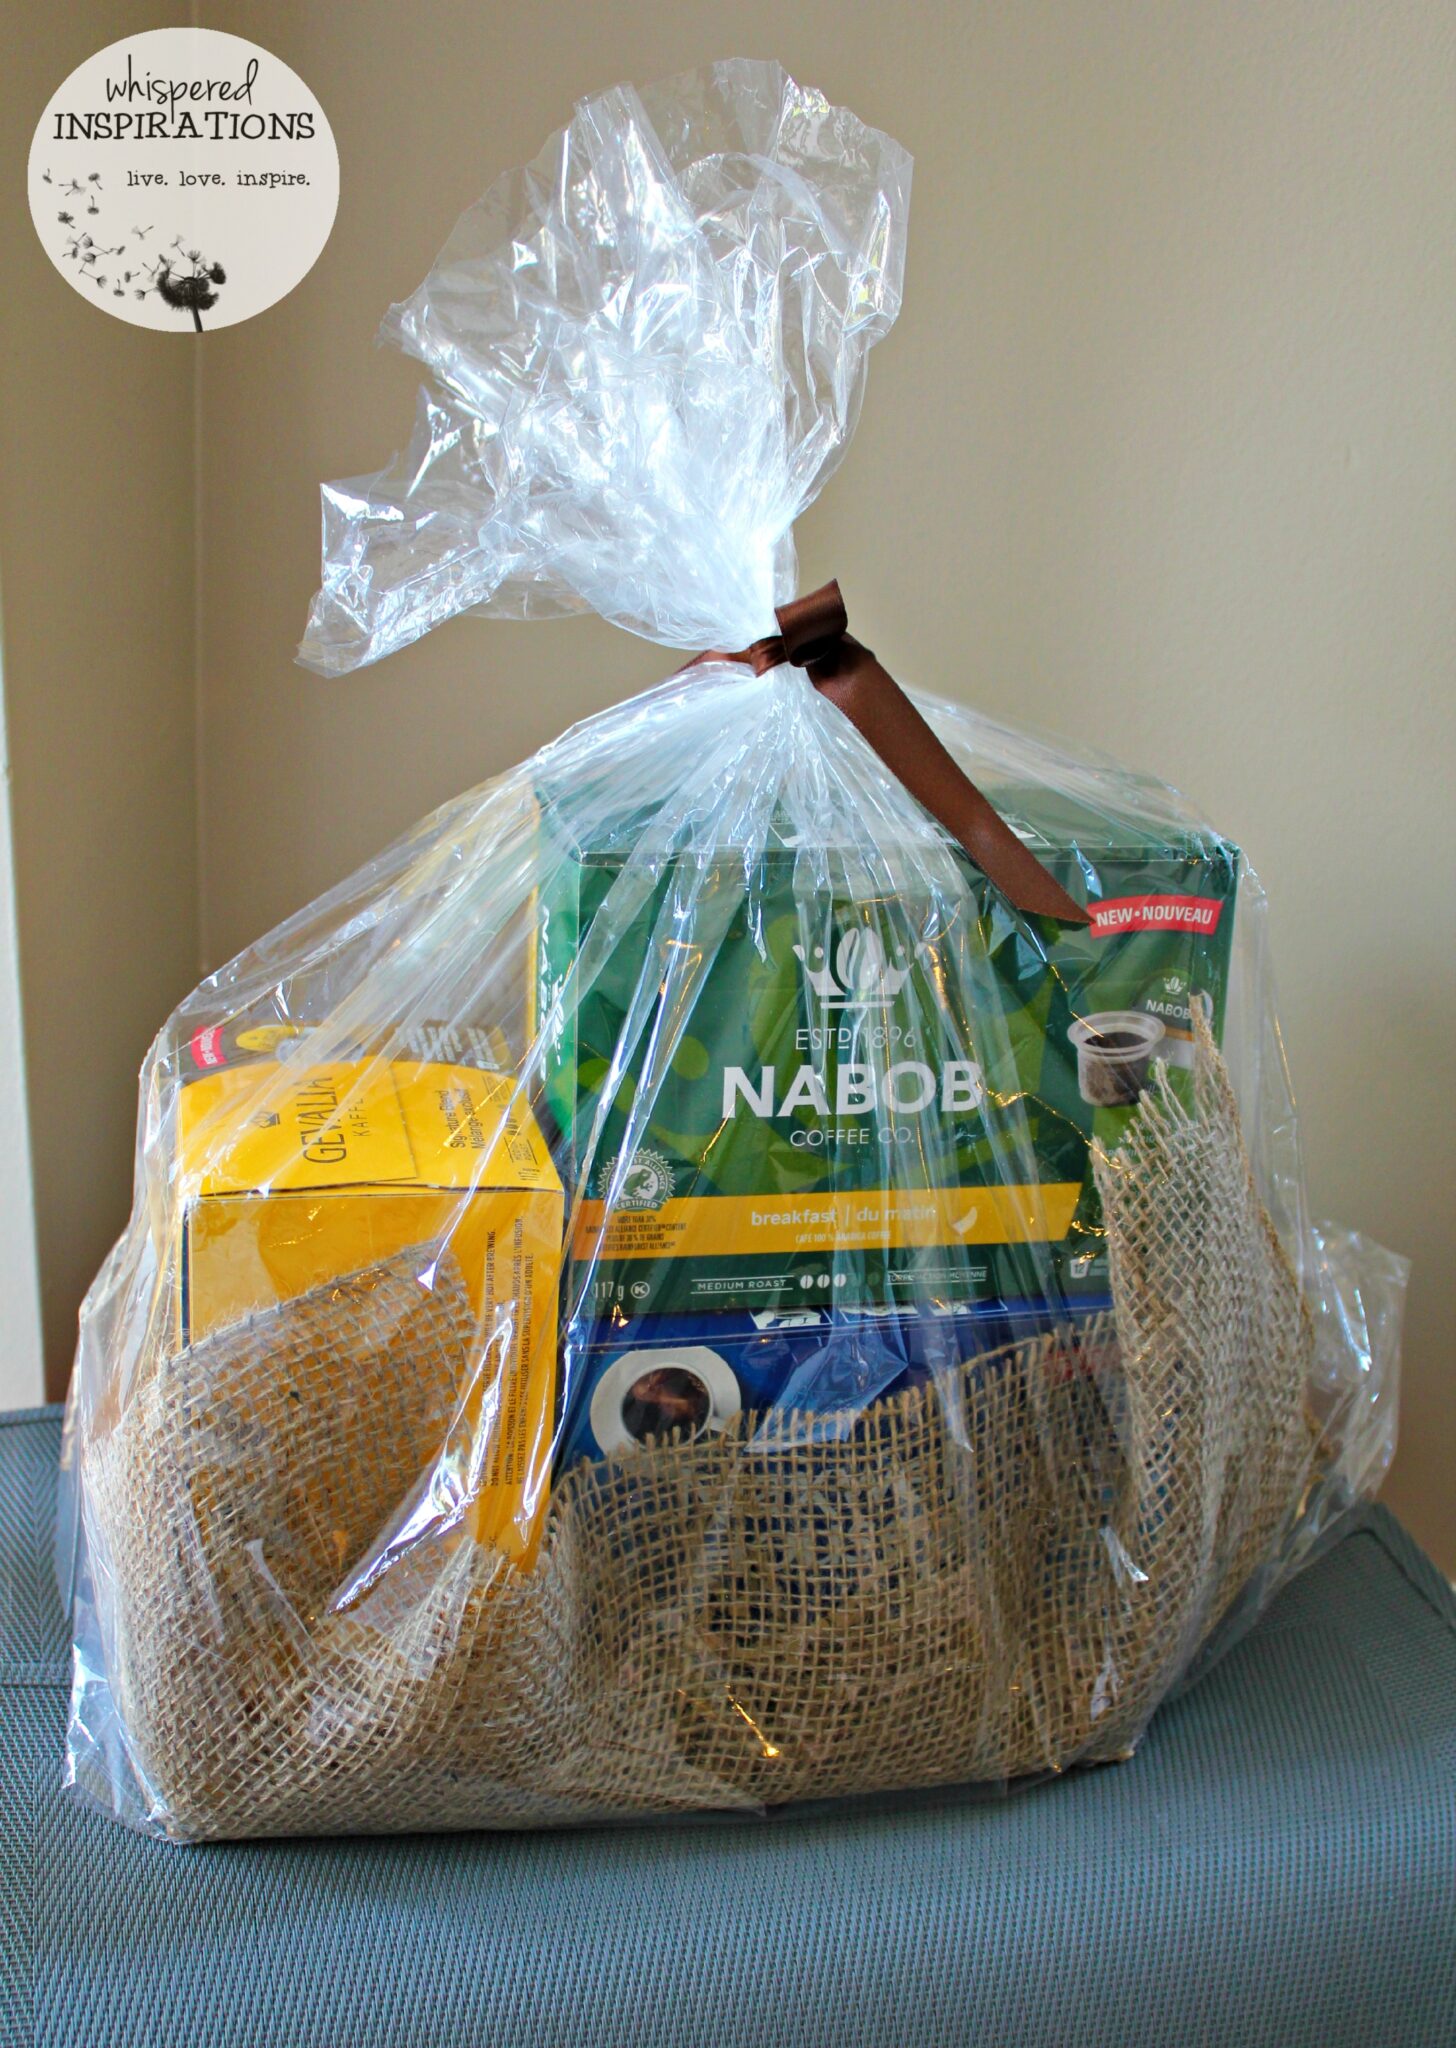 A gift basket with K-cups from Nabob, Gevalia, and Maxwell House.